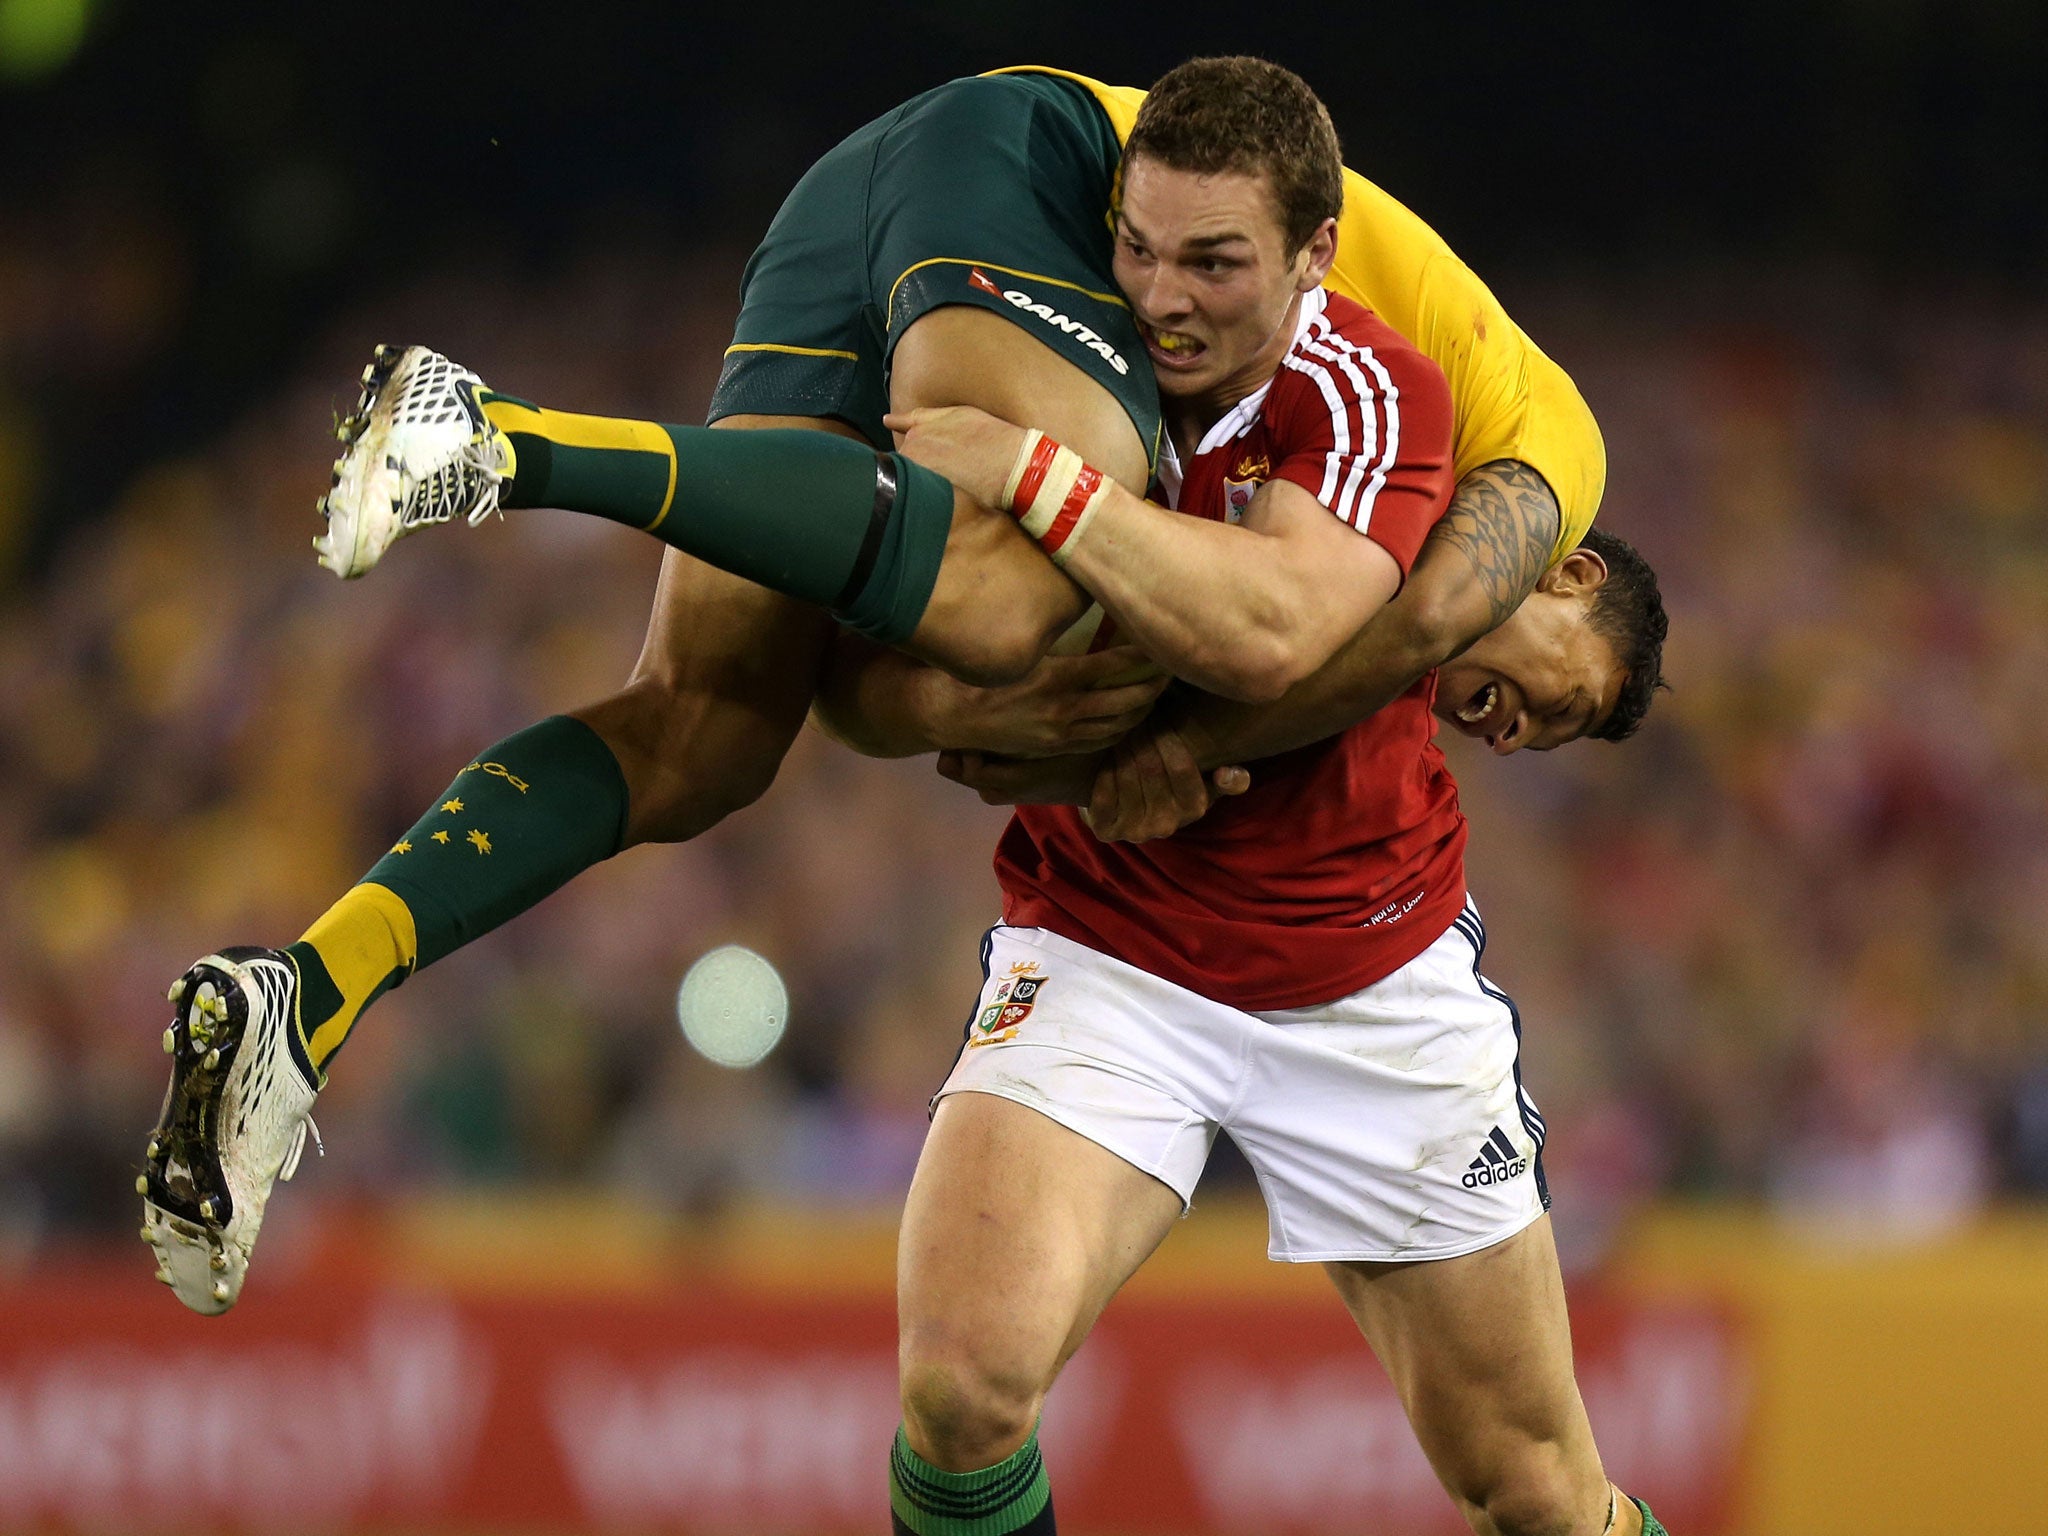 The Lions need more of the spirit shown by George North